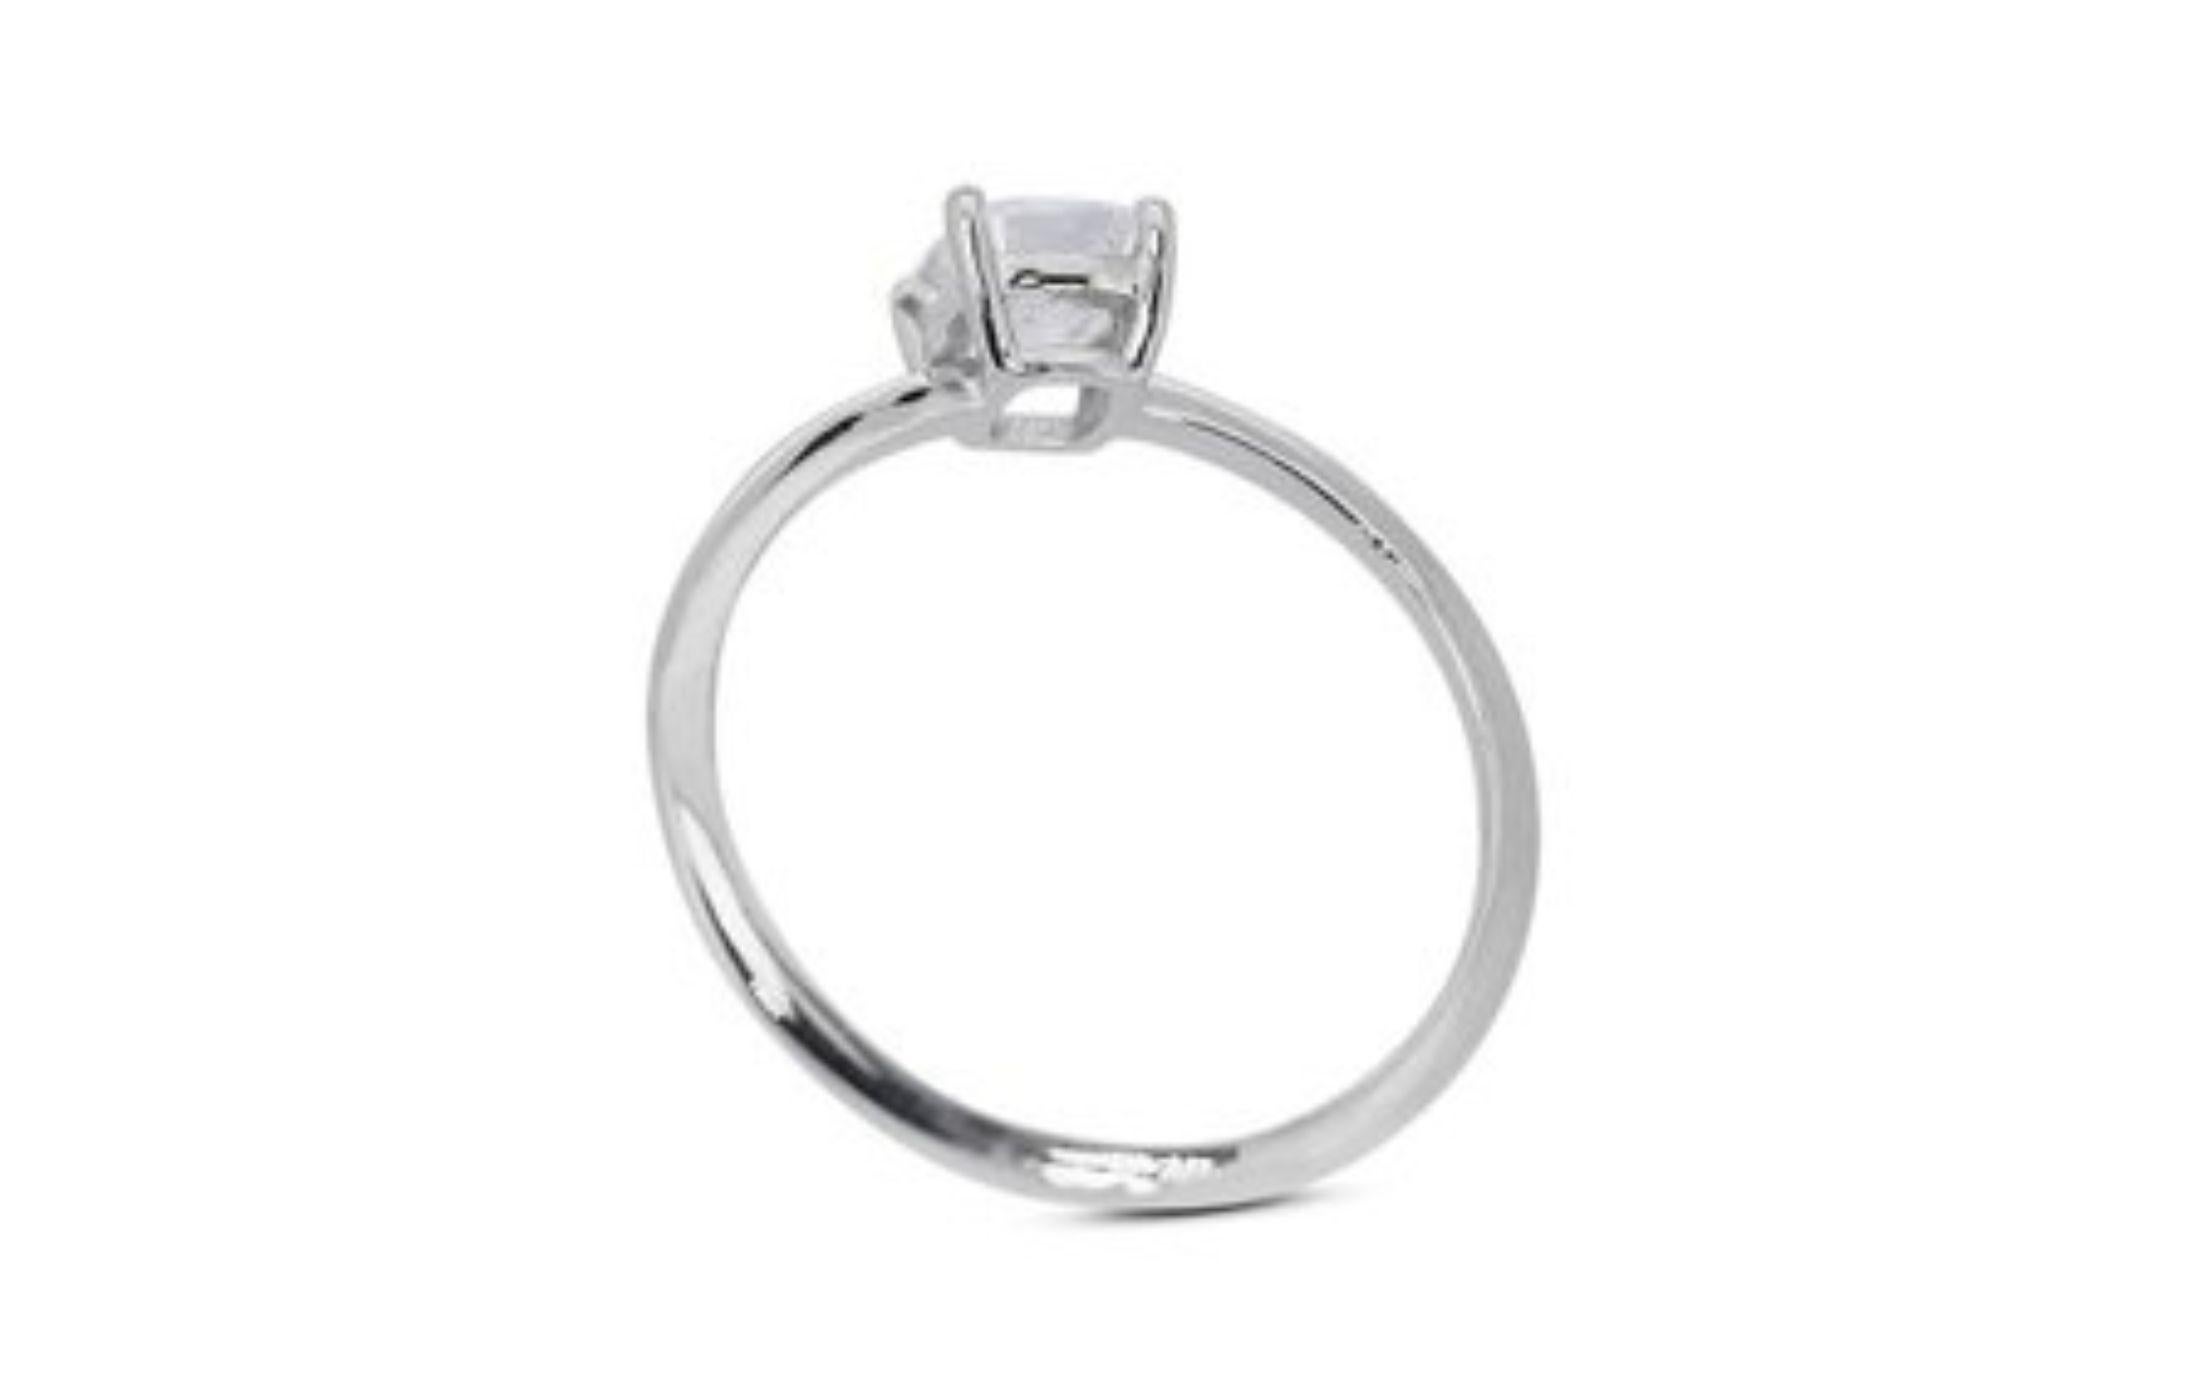 Dazzling 1.52 Carat Cushion Modified Diamond Ring in 18K White Gold For Sale 2